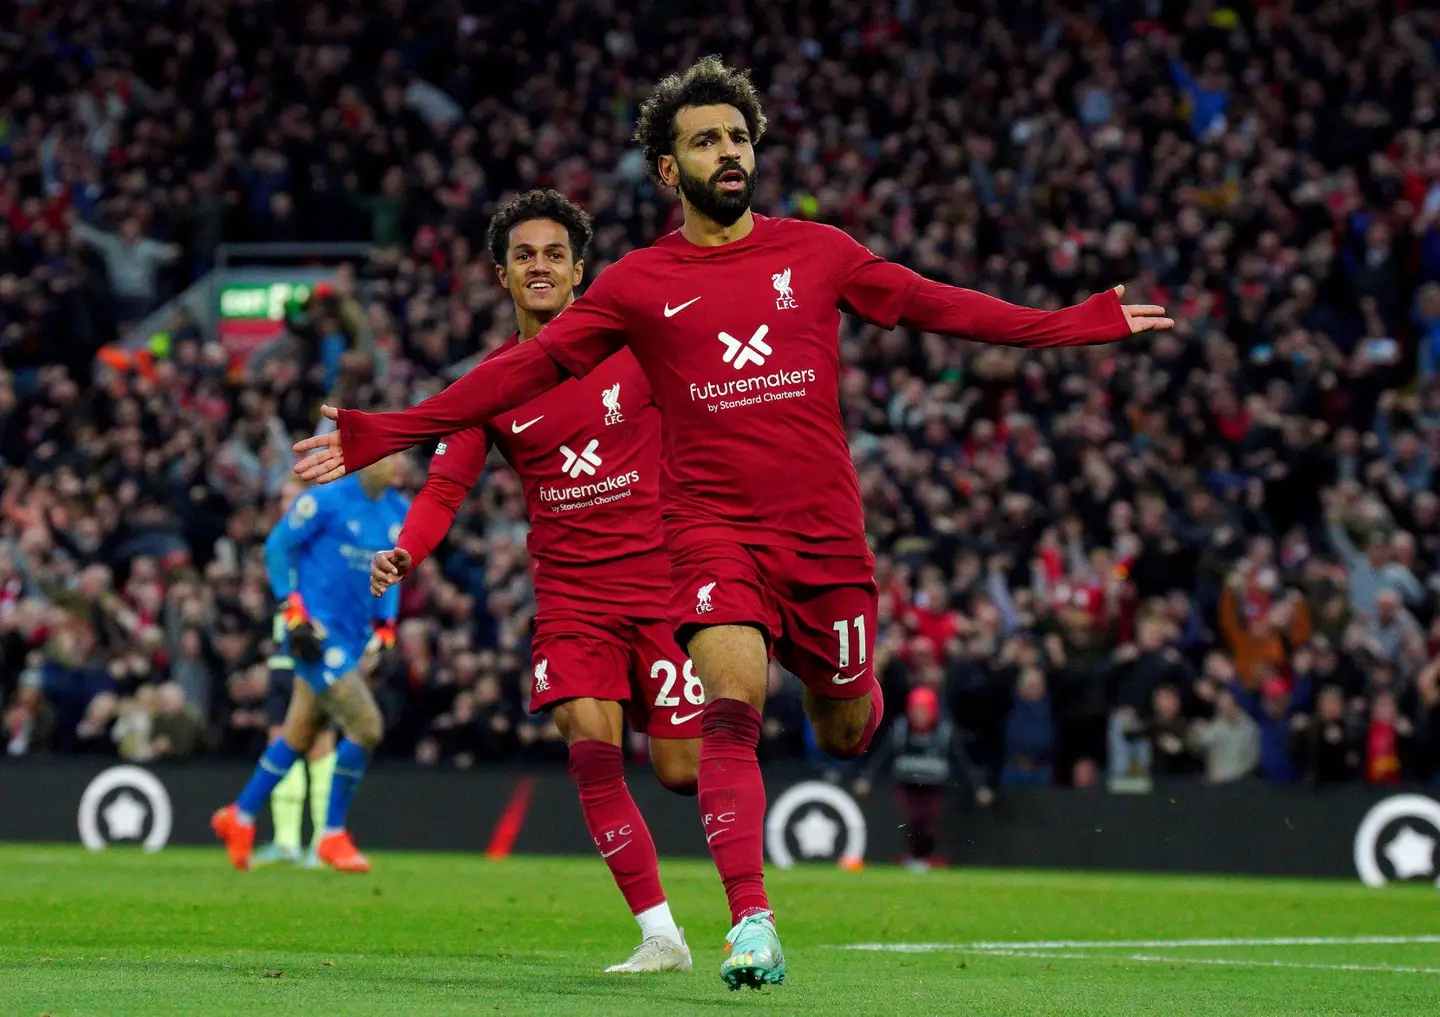 Liverpool beat Manchester City 1-0 at Anfield (Image: Alamy)